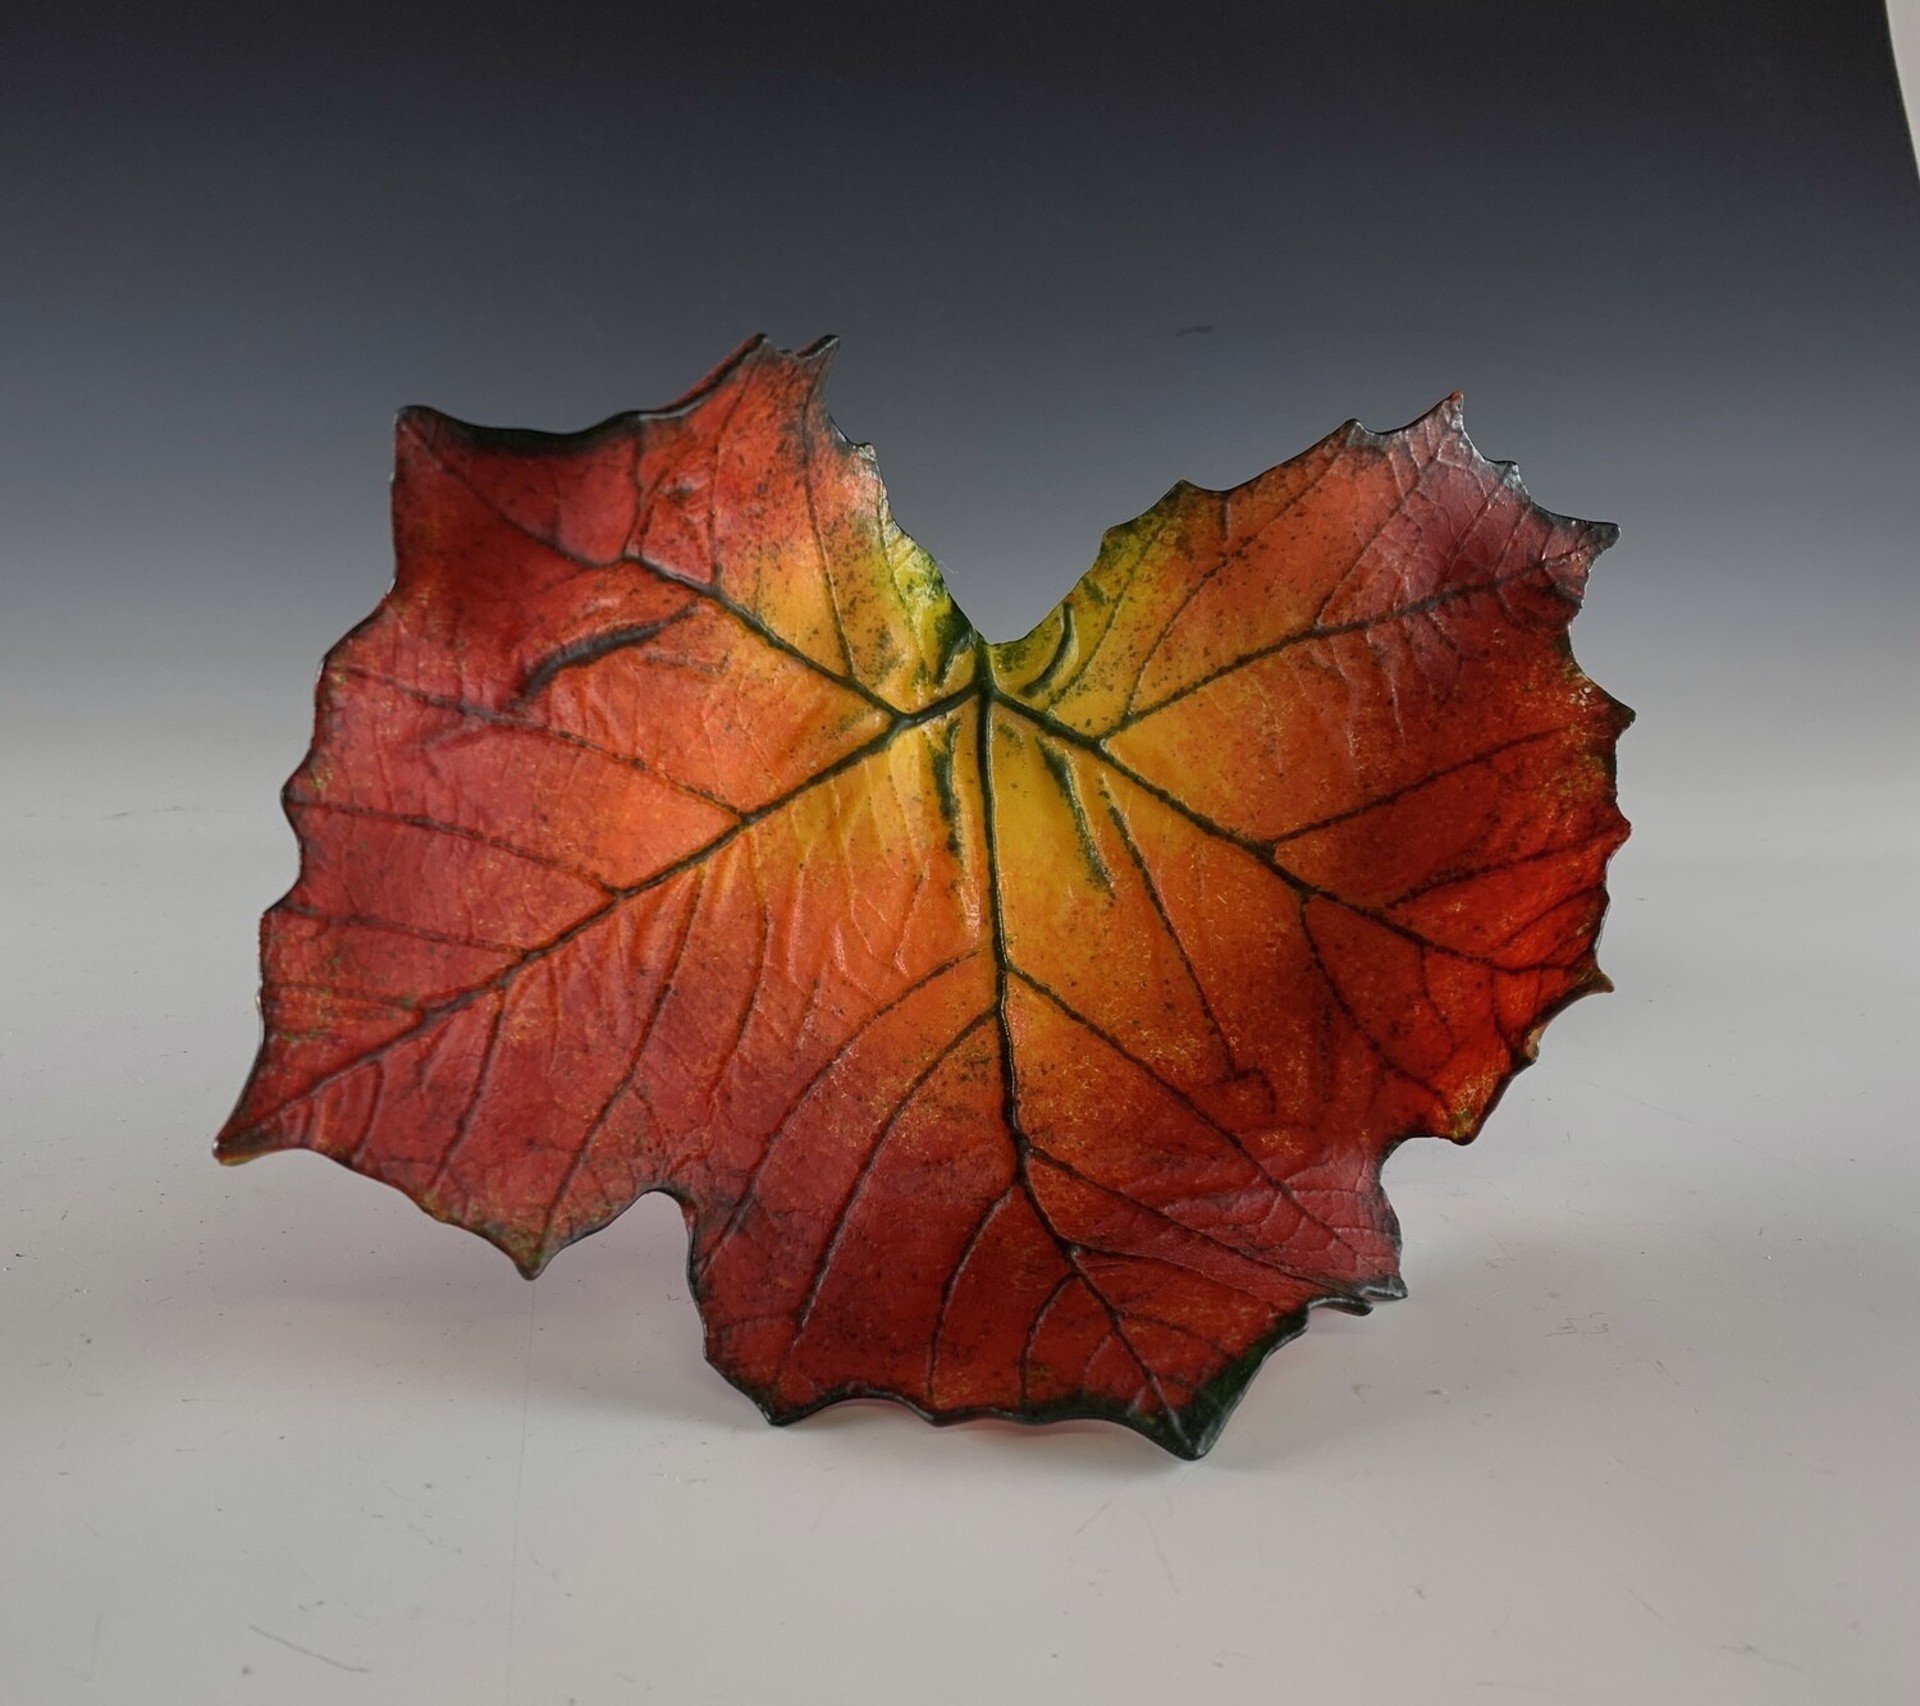 Sycamore Leaf - Orange, Red, Yellow by Deb Williams